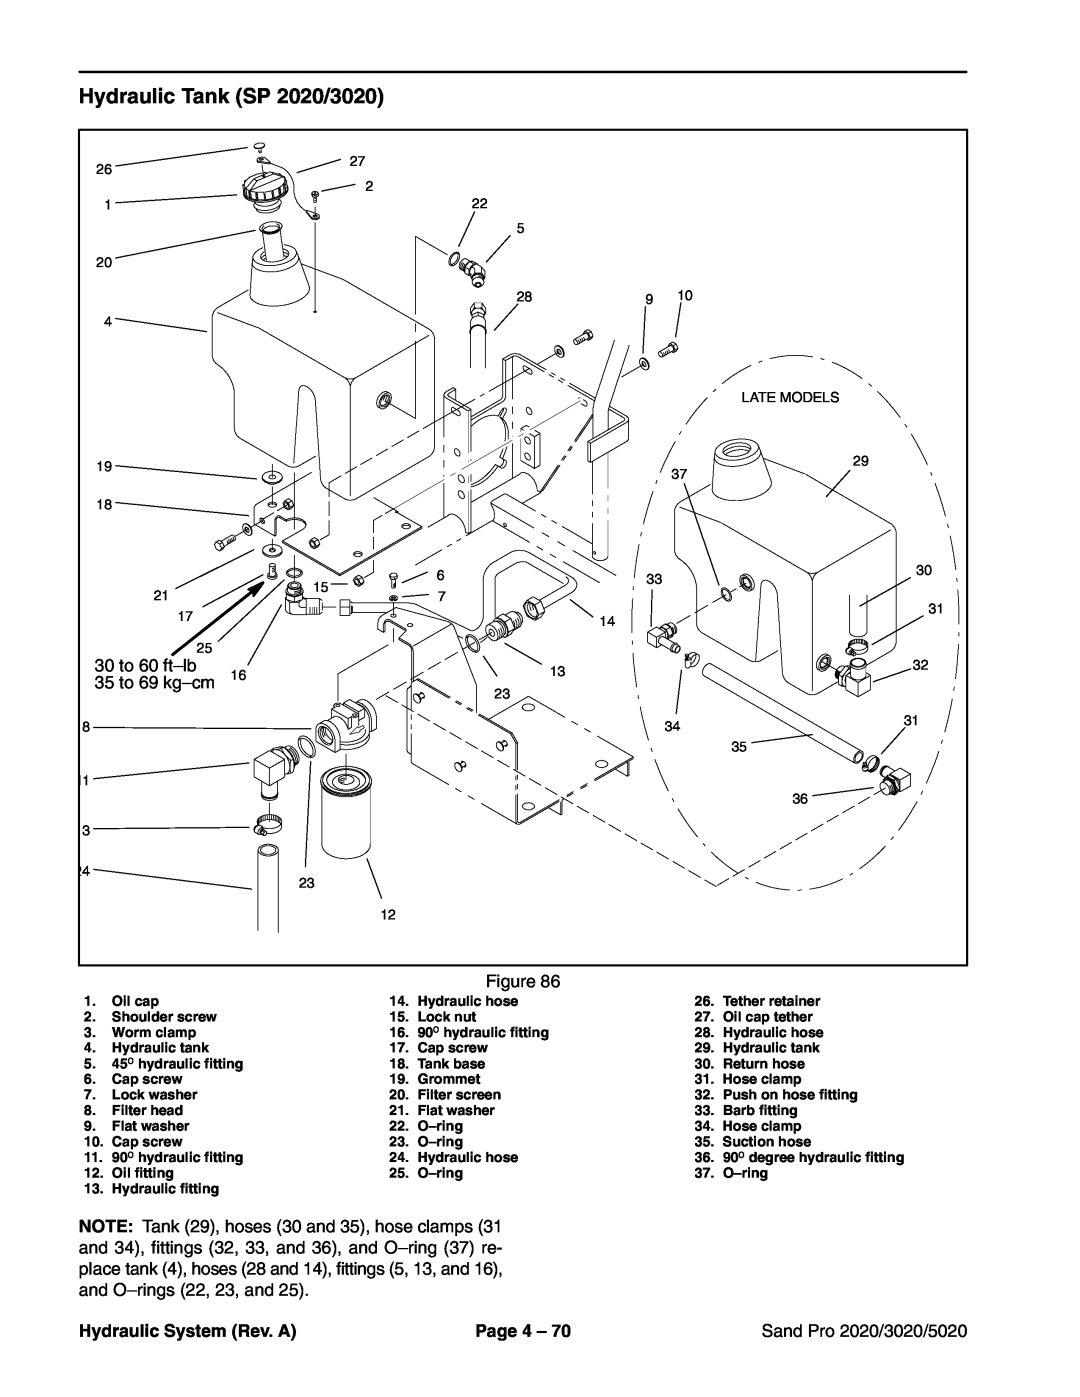 Toro 5020 service manual Hydraulic Tank SP 2020/3020, 30 to 60 ft-lb, 35 to 69 kg-cm, Hydraulic System Rev. A, Page 4 